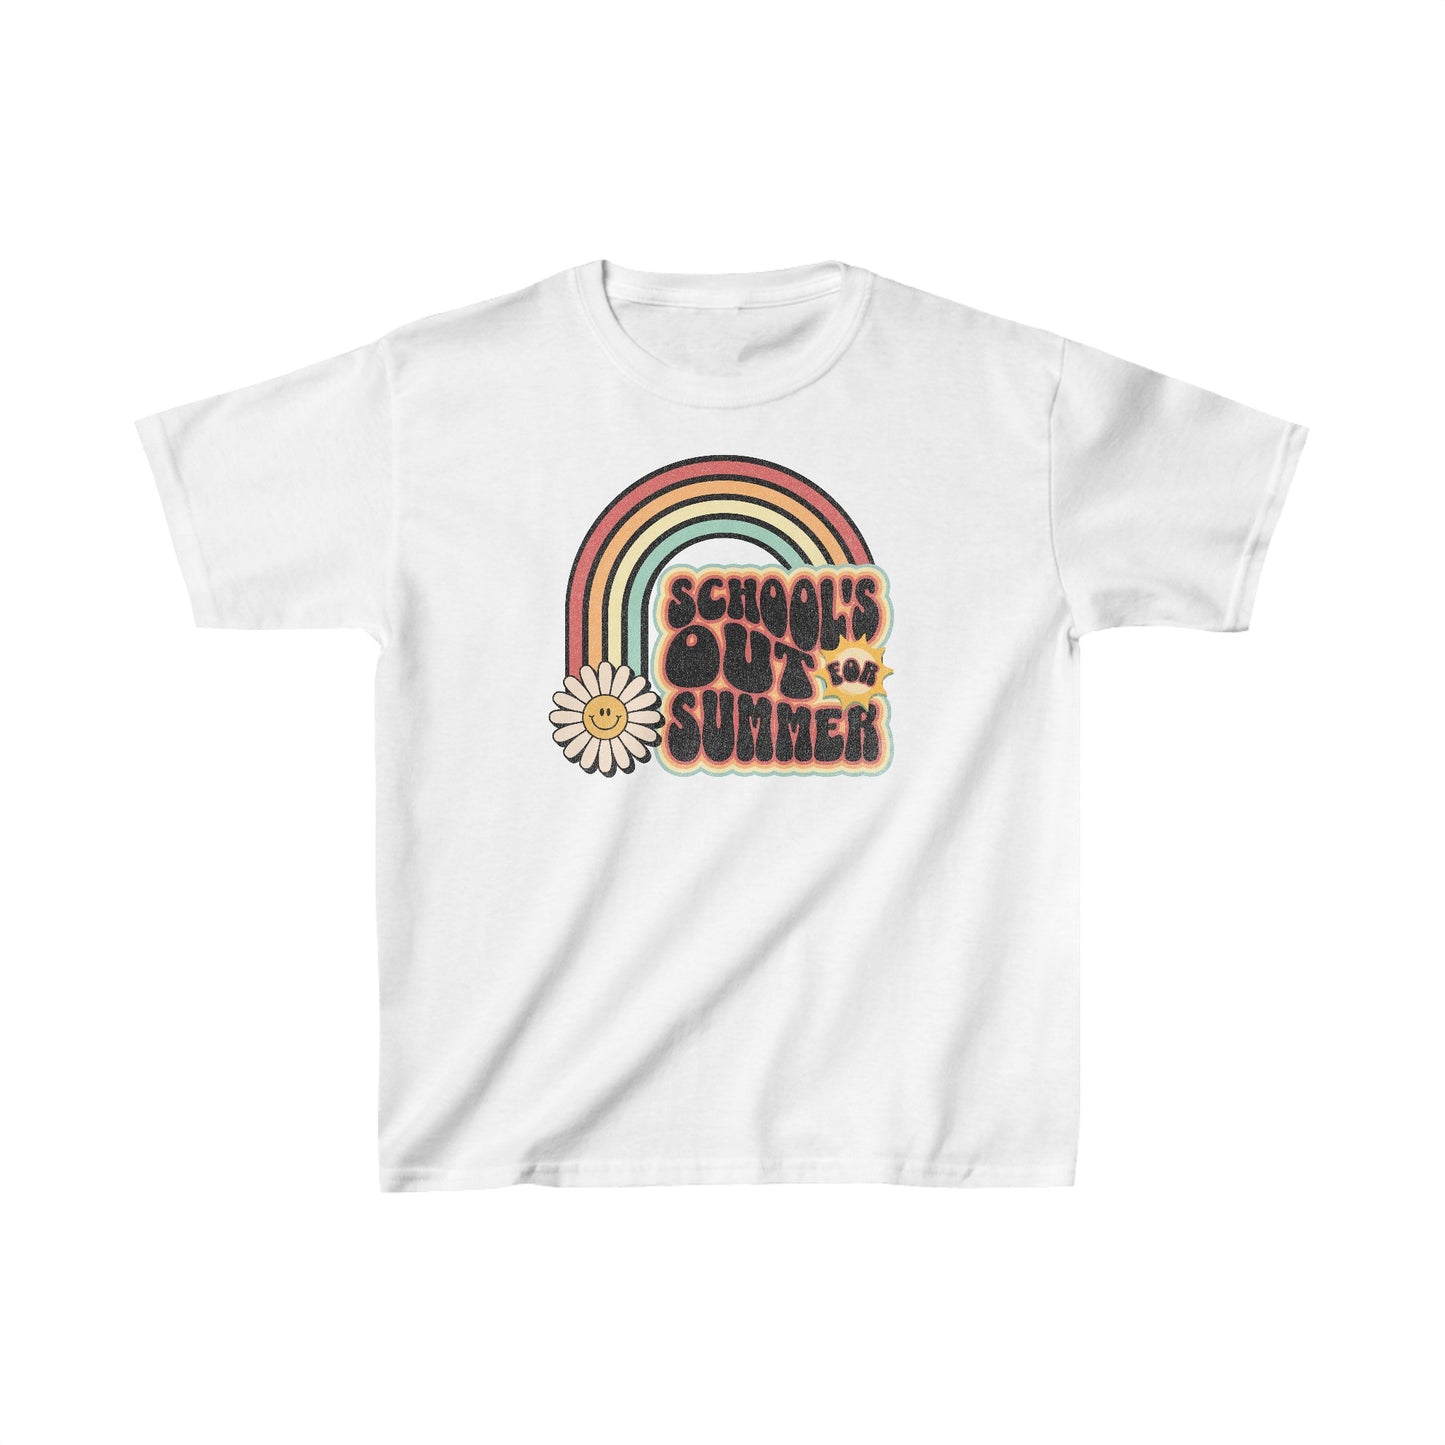 School's out for Summer - Kids Heavy Cotton™ Tee